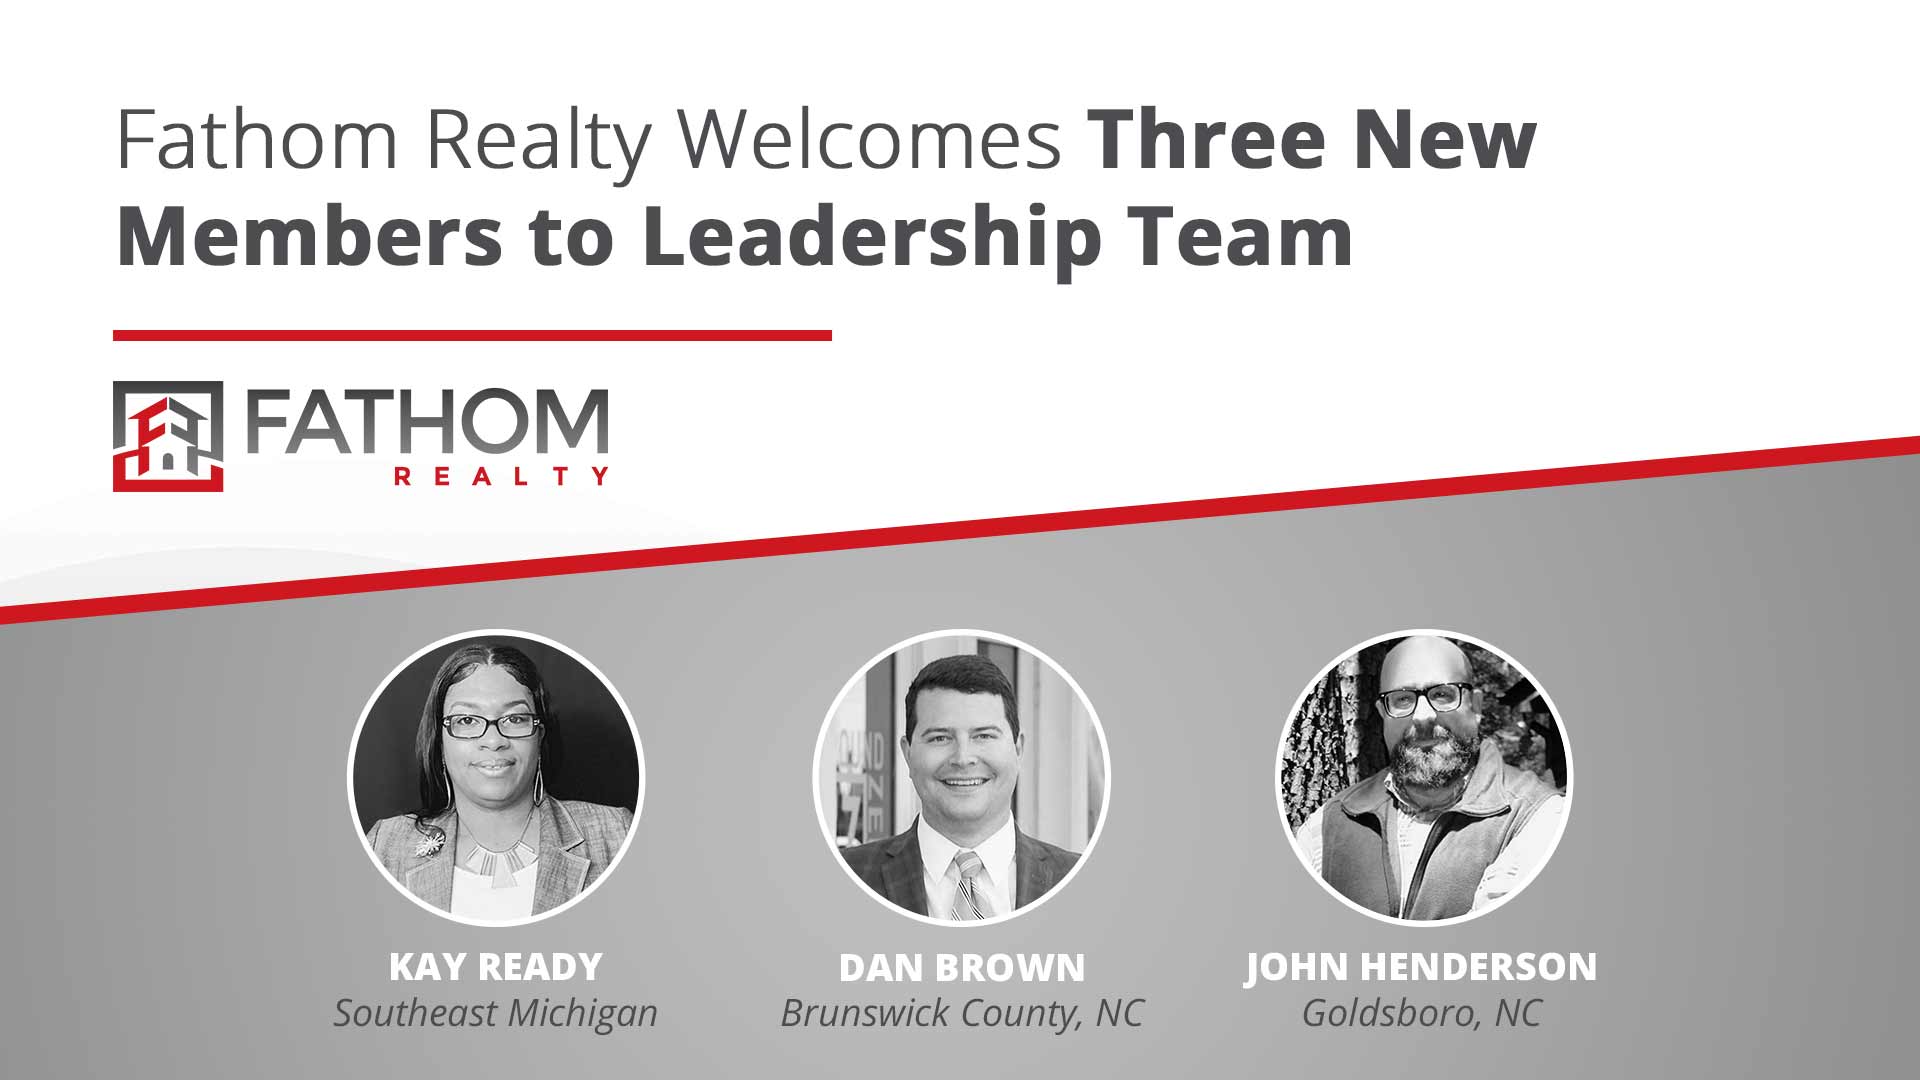 Featured image for “Fathom Realty Welcomes Three New Members to Leadership Team”